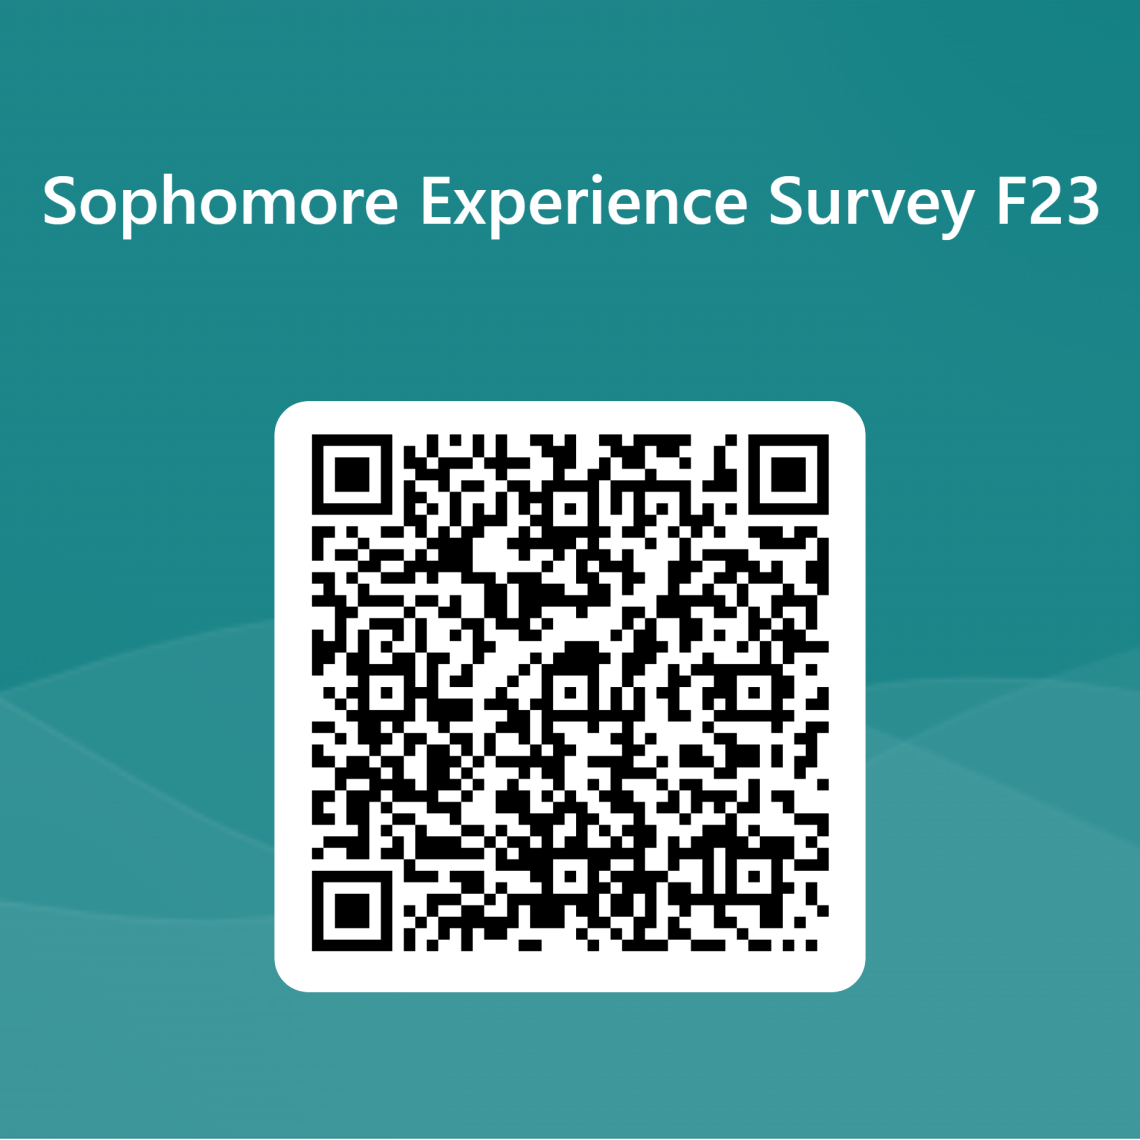 QR code for Sophomore Experience survey